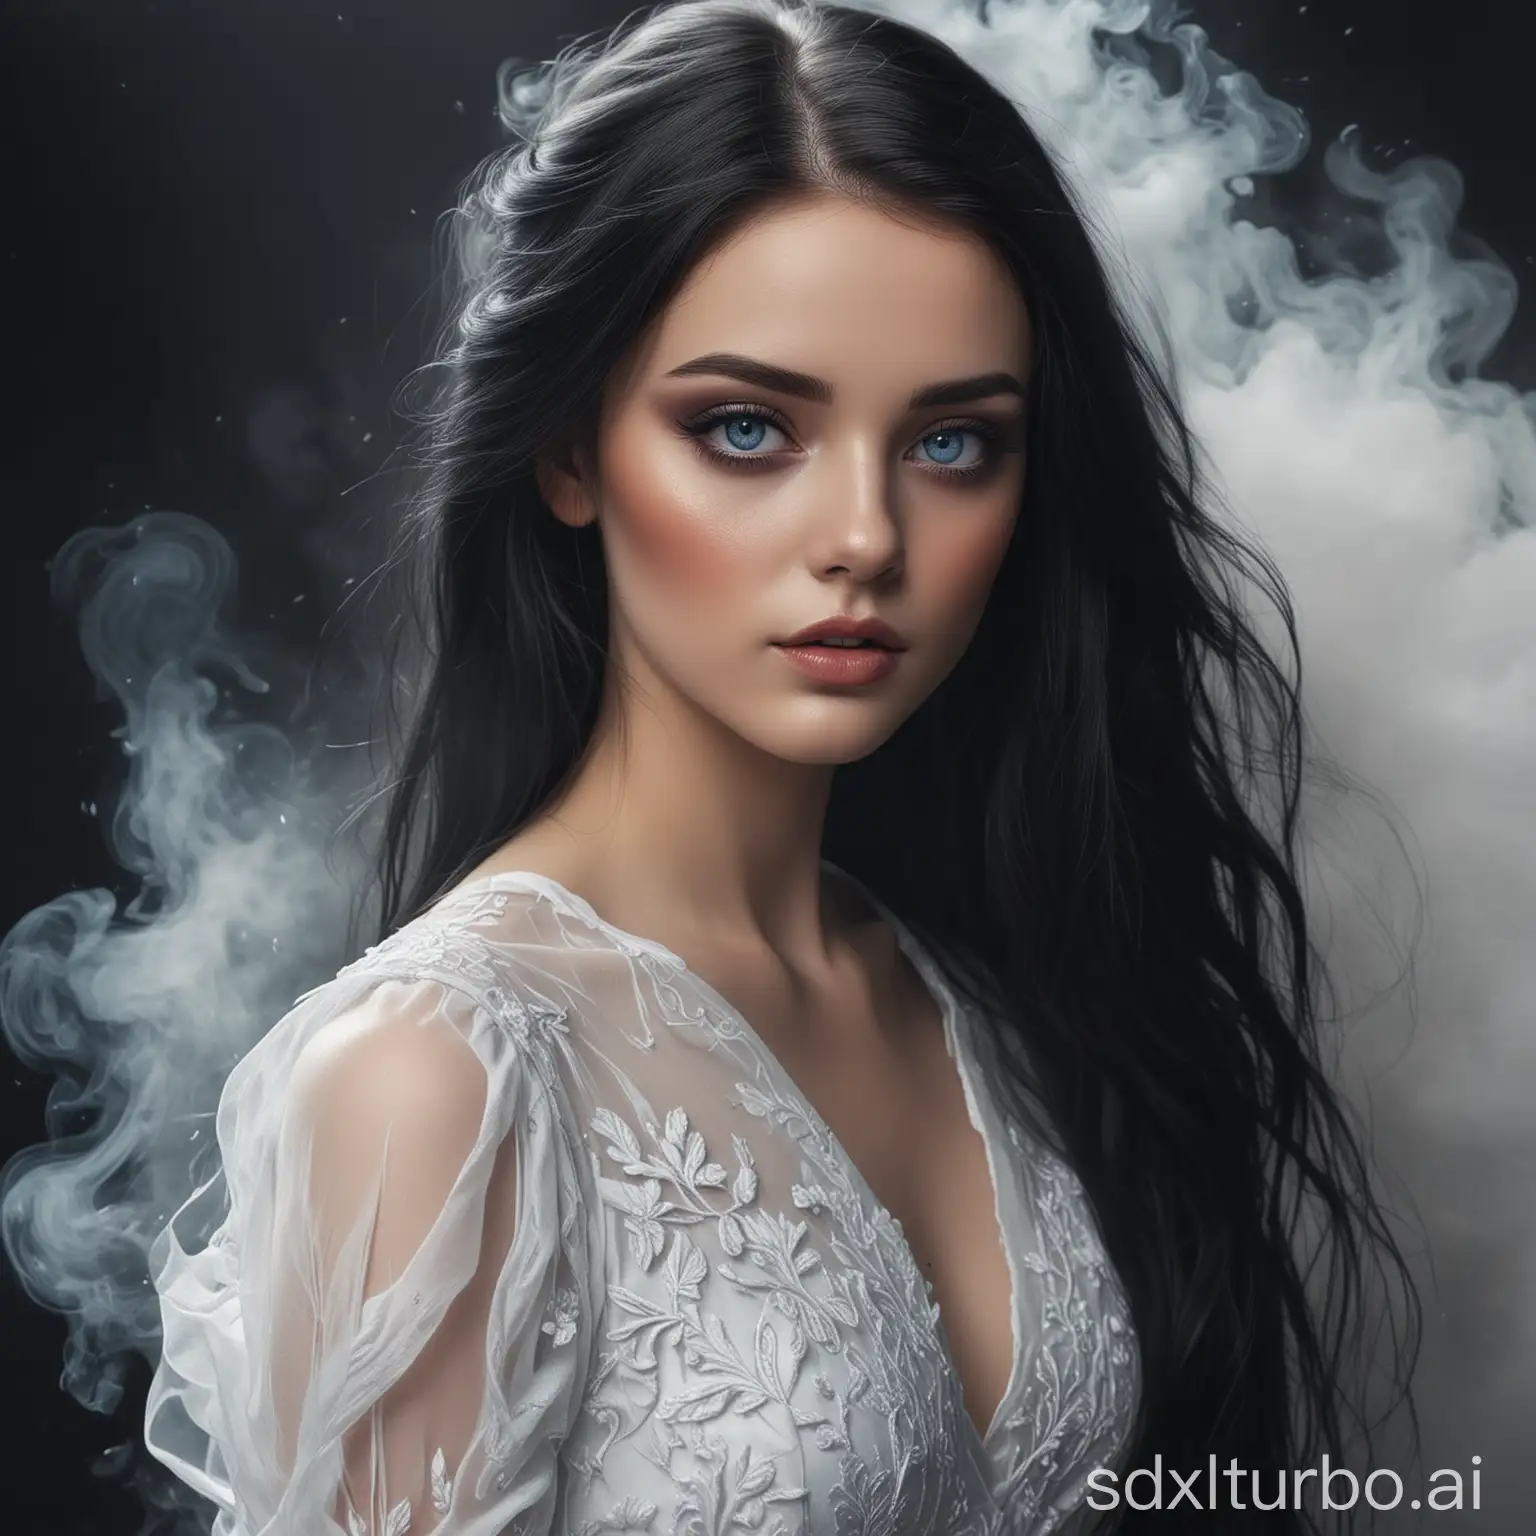 Ethereal-Beauty-Enigmatic-Girl-in-White-Dress-Amidst-Wisps-of-Smoke